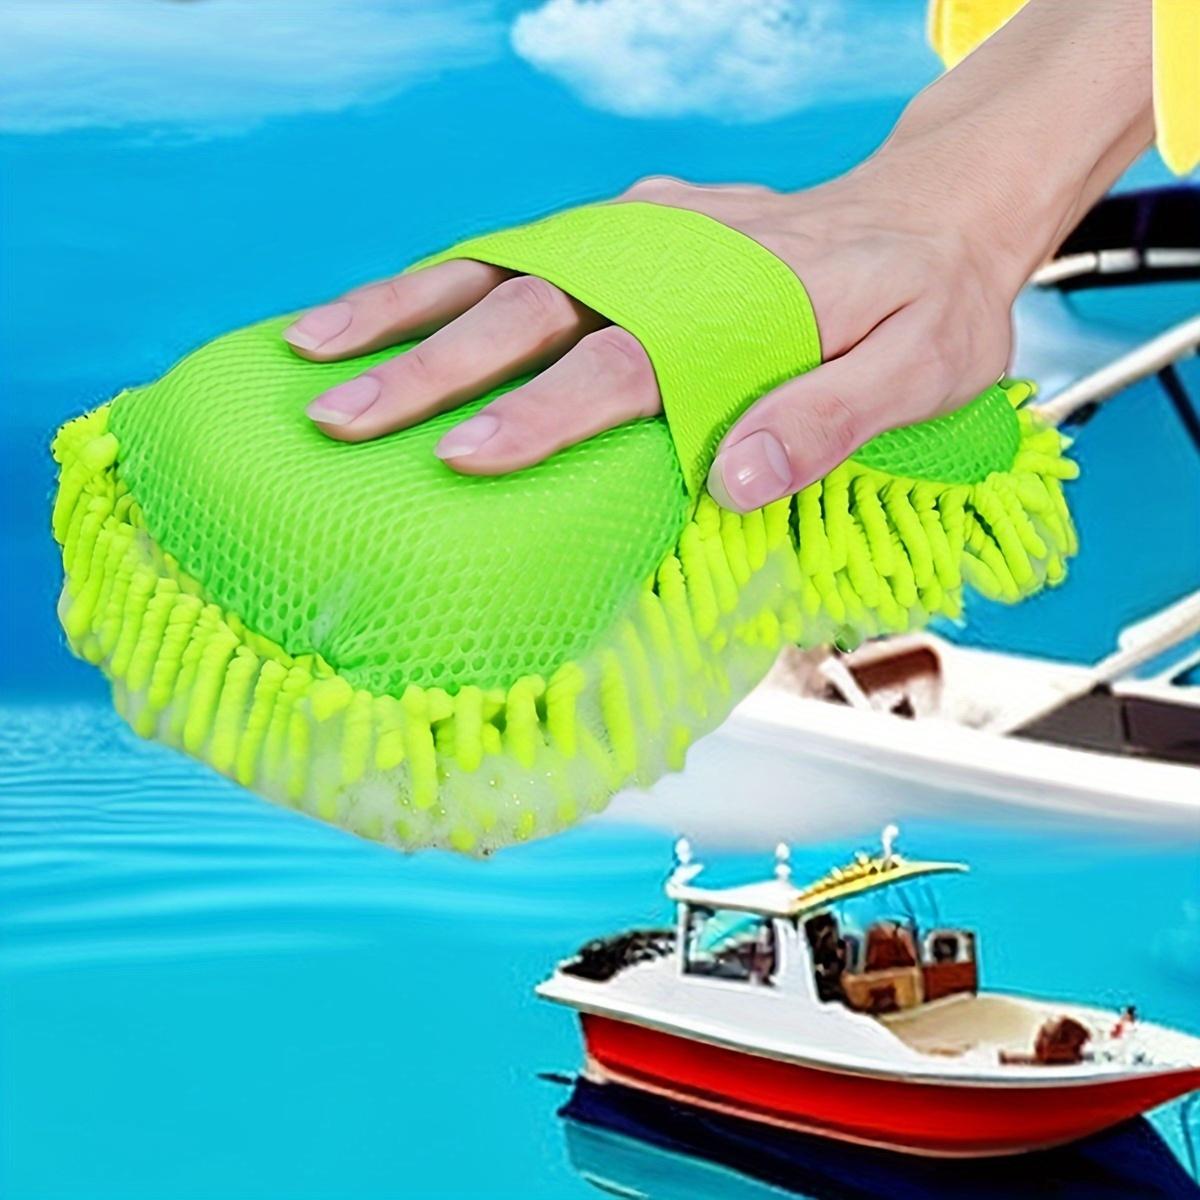 

Microfiber Car Wash Mitt, 1 Pc Chenille Scratch-free Cleaning Glove, Ultra-absorbent Waffle Weave Towel For Auto Detailing, Multi-purpose For Bathroom, Toilet, Car, Patio, Glass - Green